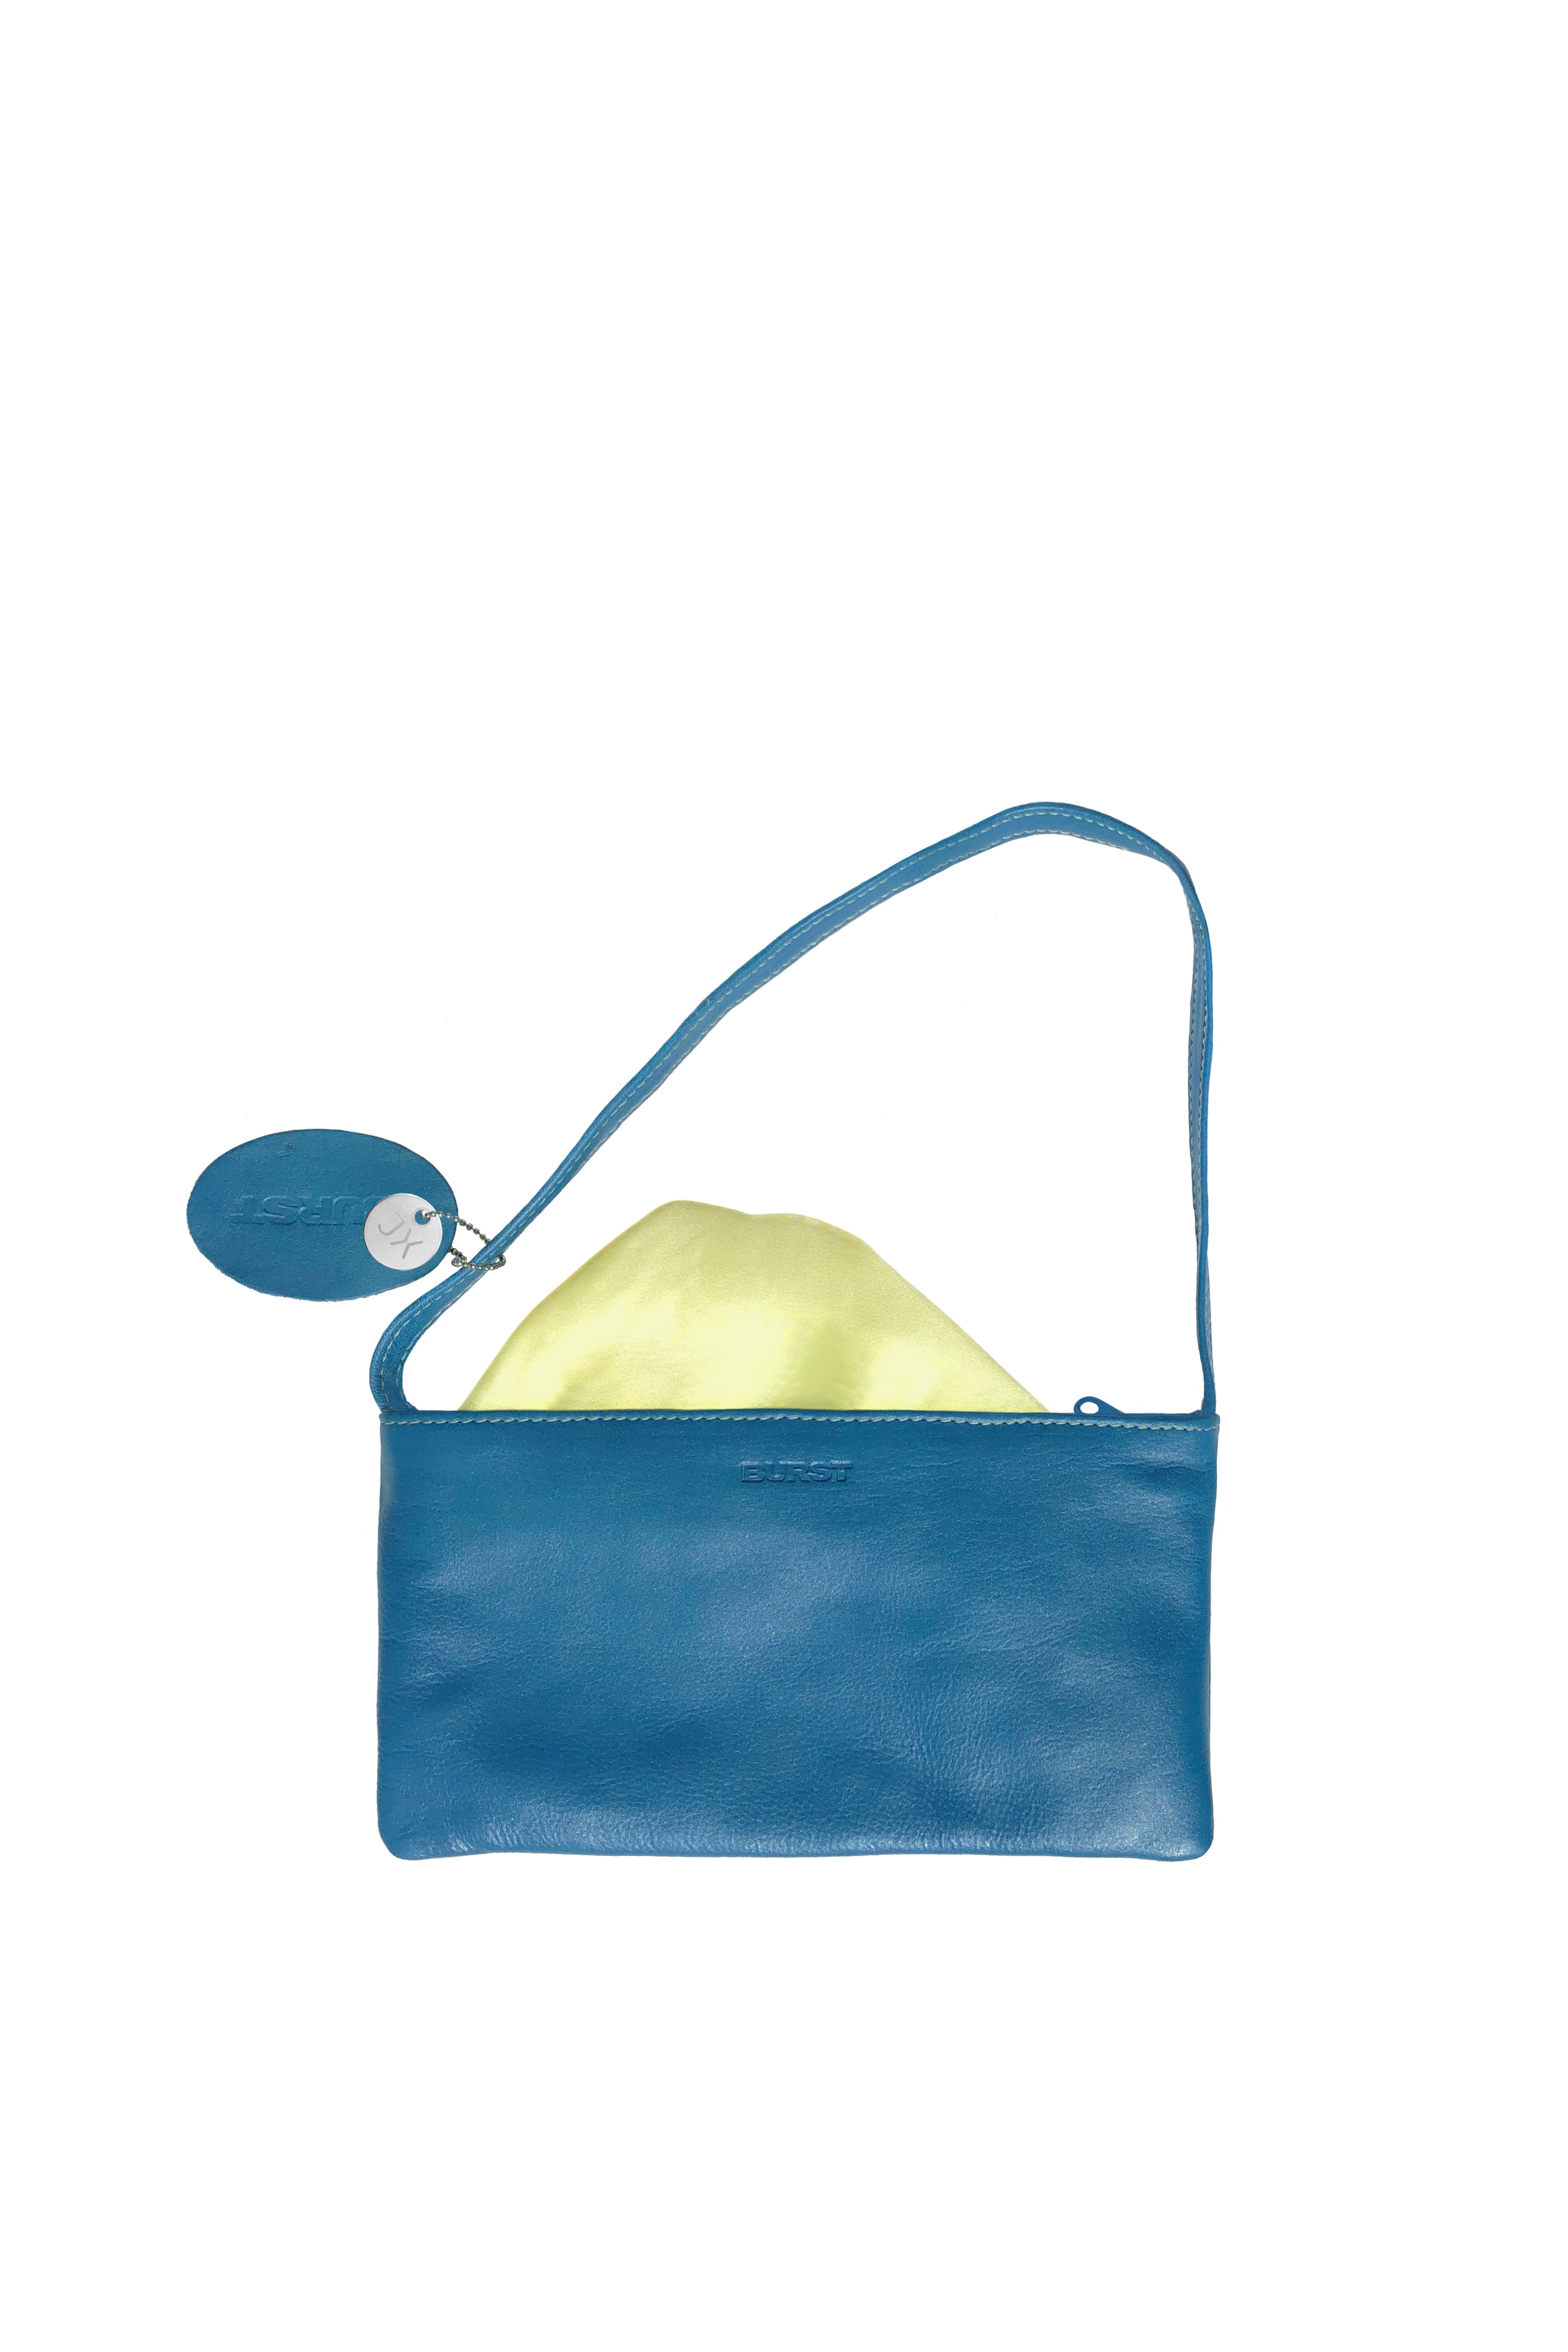 Interior view: Small slim leather handbag, Mediterranean blue. Vivid light lemon lining and stitches. Zipper. Upcycled, sustainable